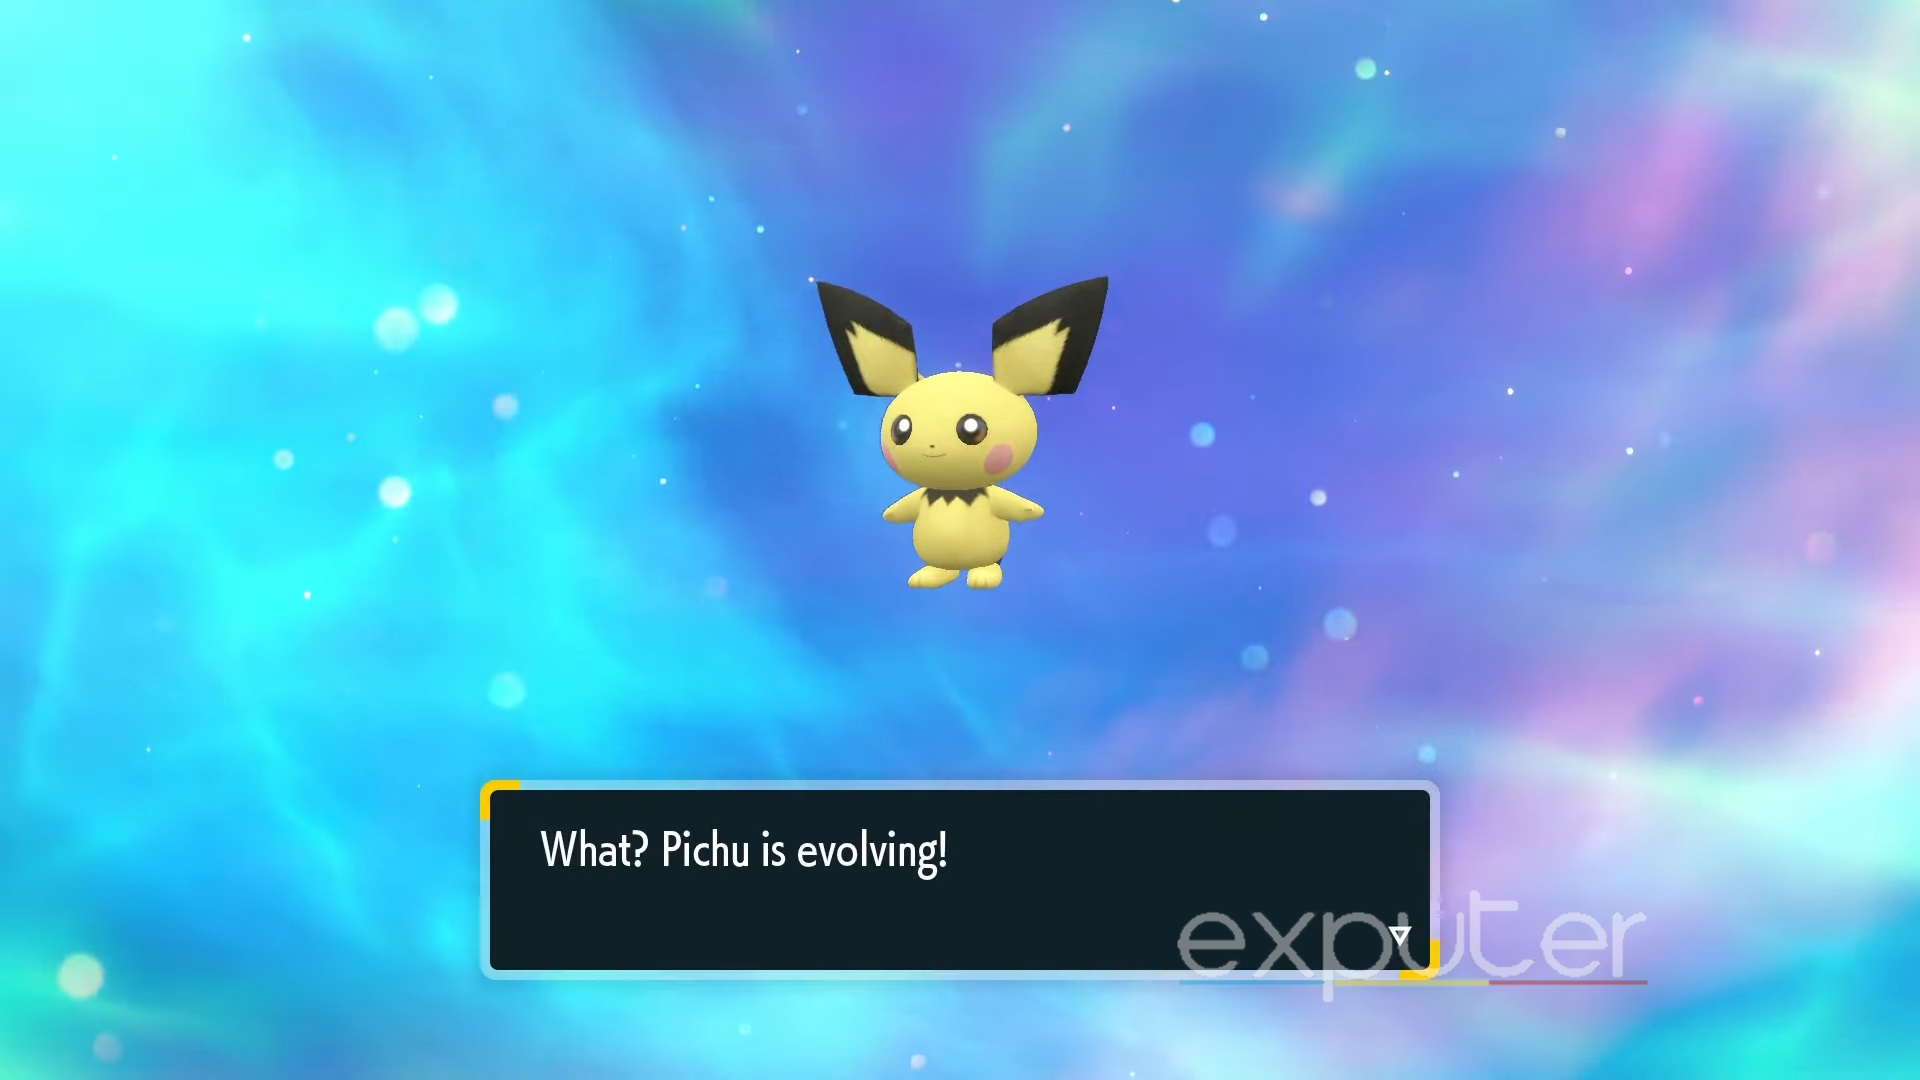 Pichu is evolving into Pikachu in Pokemon Scarlet and Violet